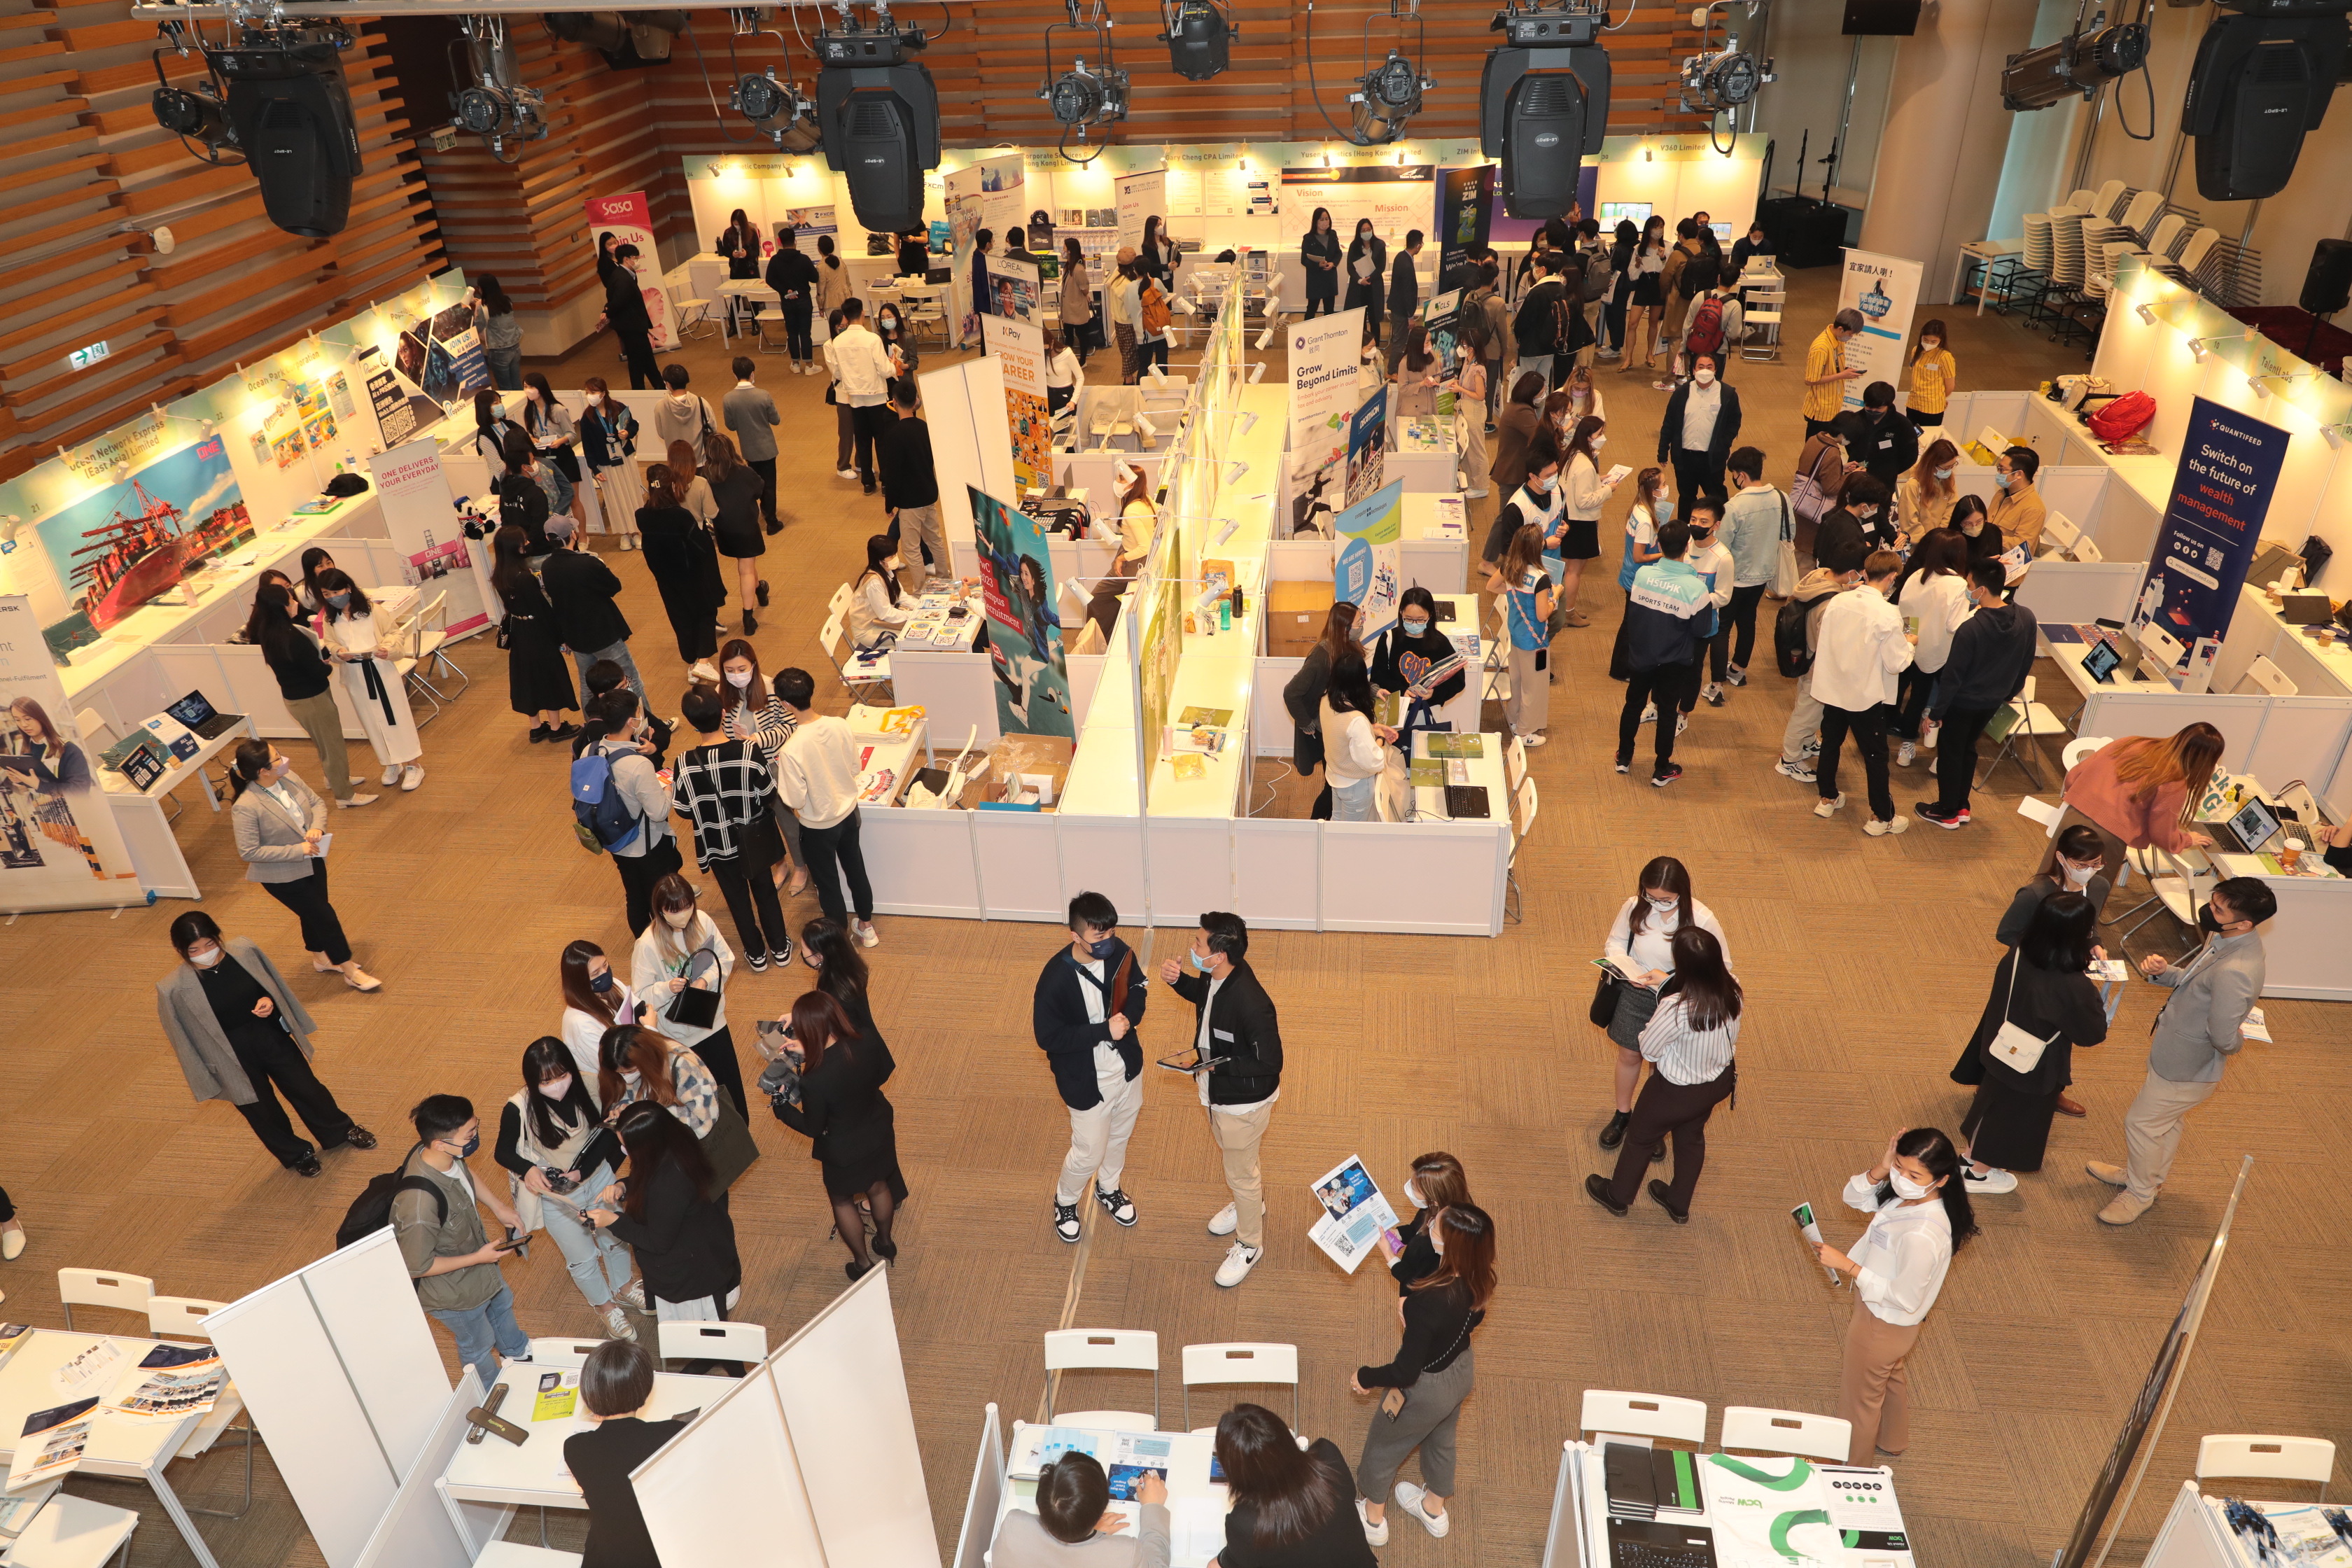 HSUHK Careers Fair 2023 Received an Overwhelming Response Over 200 Exhibitors Participated and 3,000 Students Attended